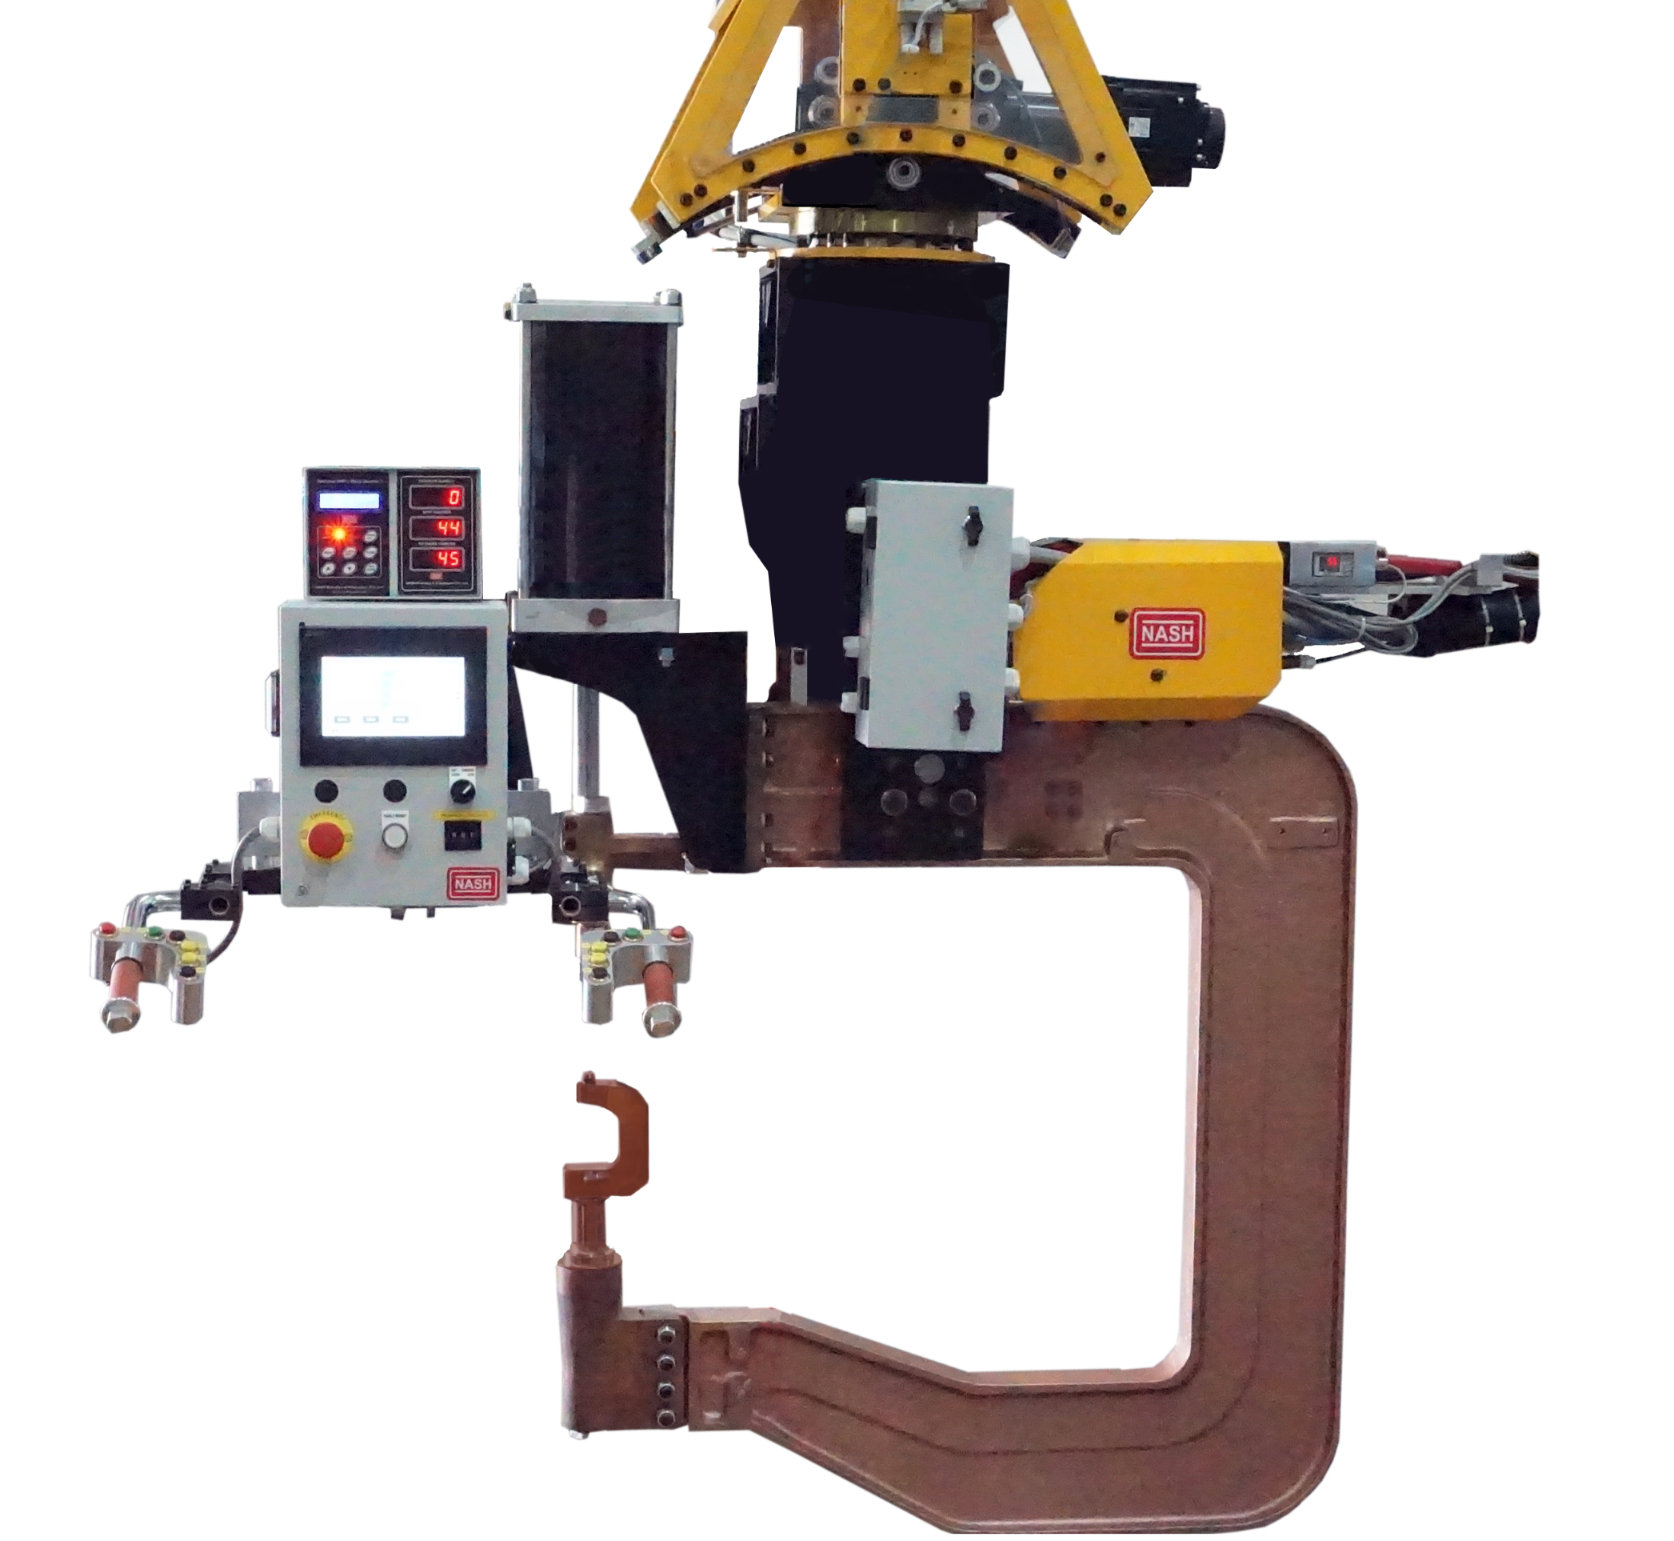 C-Type MFDC IT Gun for Metro Underframe Spot Welding(TD-820mm, TG-705mm, Tip Force-1500Kgf) mounted on a 5-Axis Manipulator